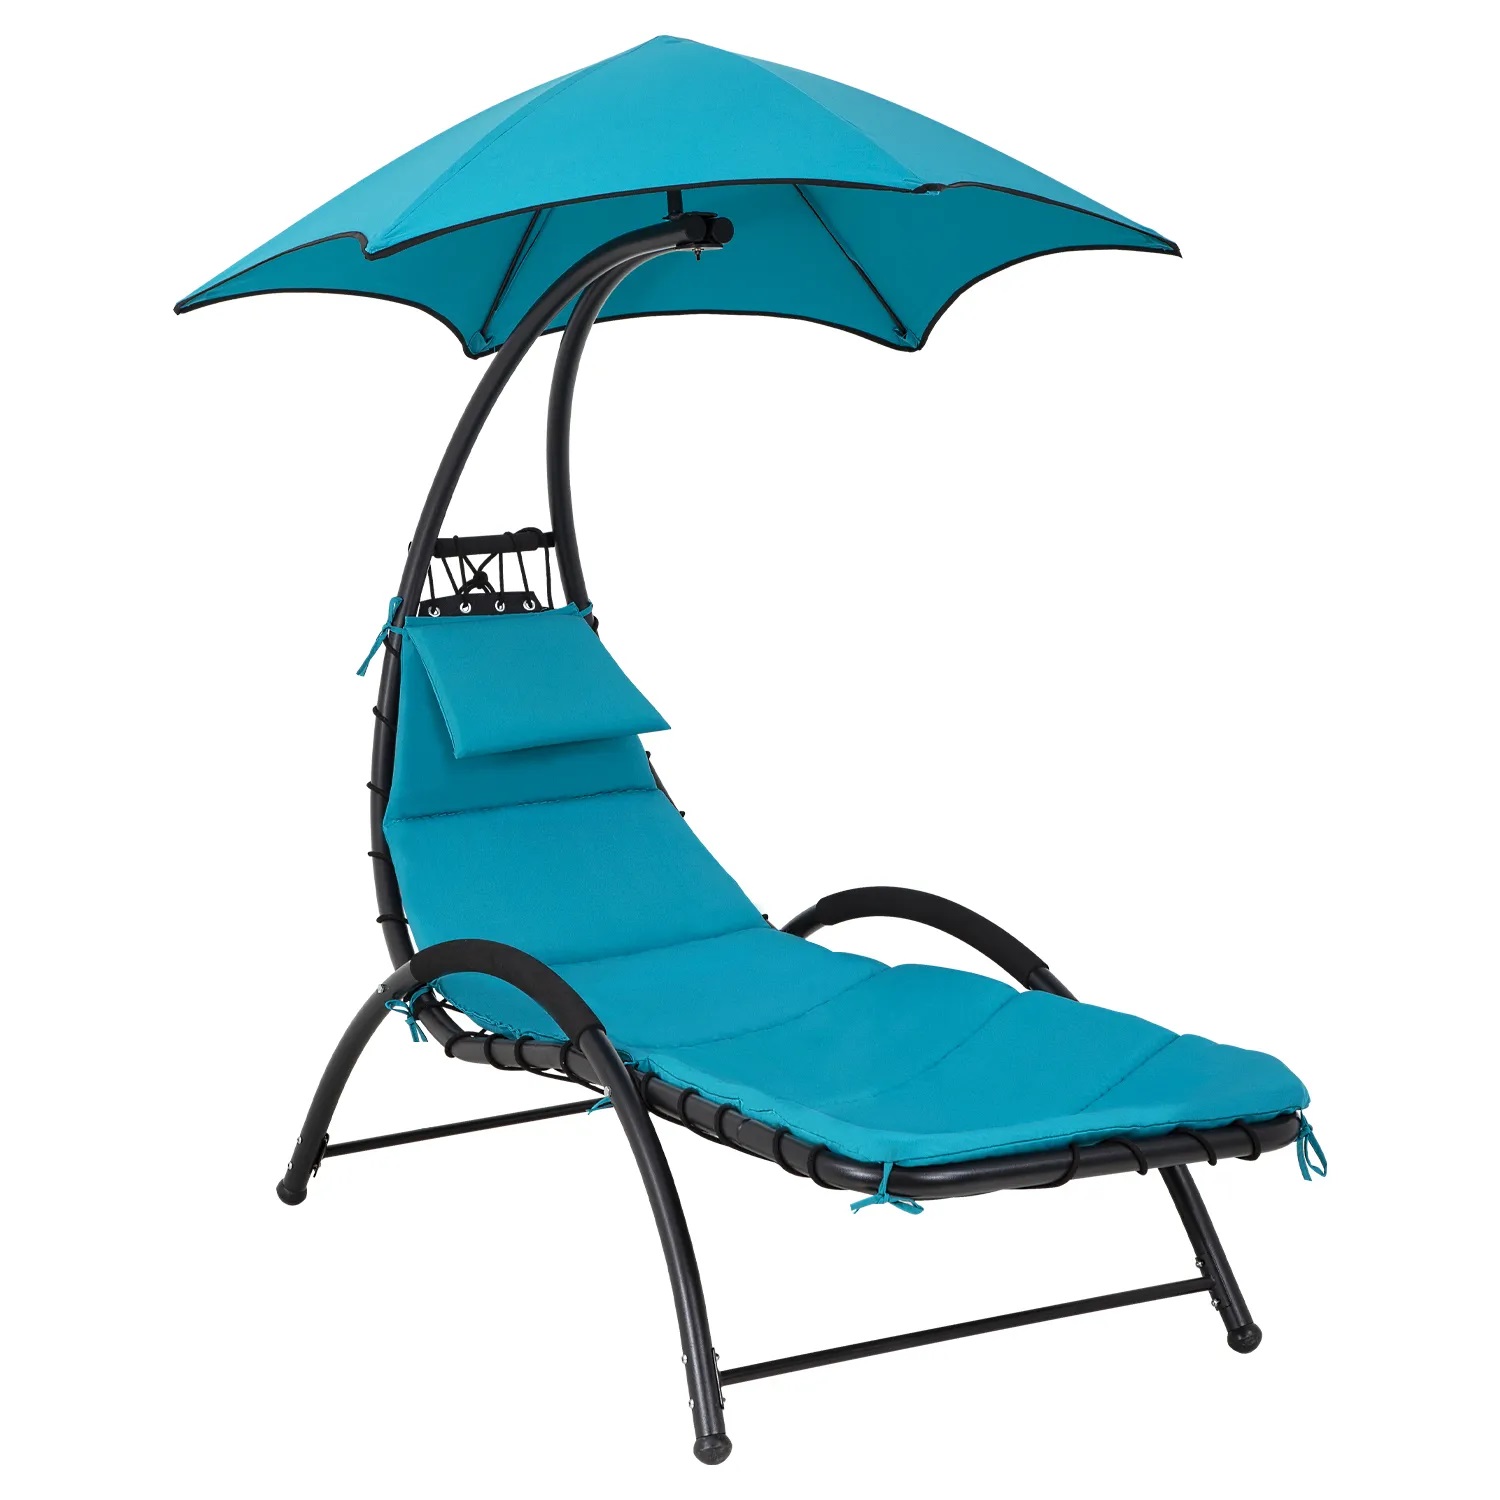 YRLLENSDAN Patio Swing Chair, Lounge Chair Outdoors with Waterproof Canopy Hammock Chair Patio Chair Arc Stand Removable Cushion and Headrest (Blue) - image 1 of 7